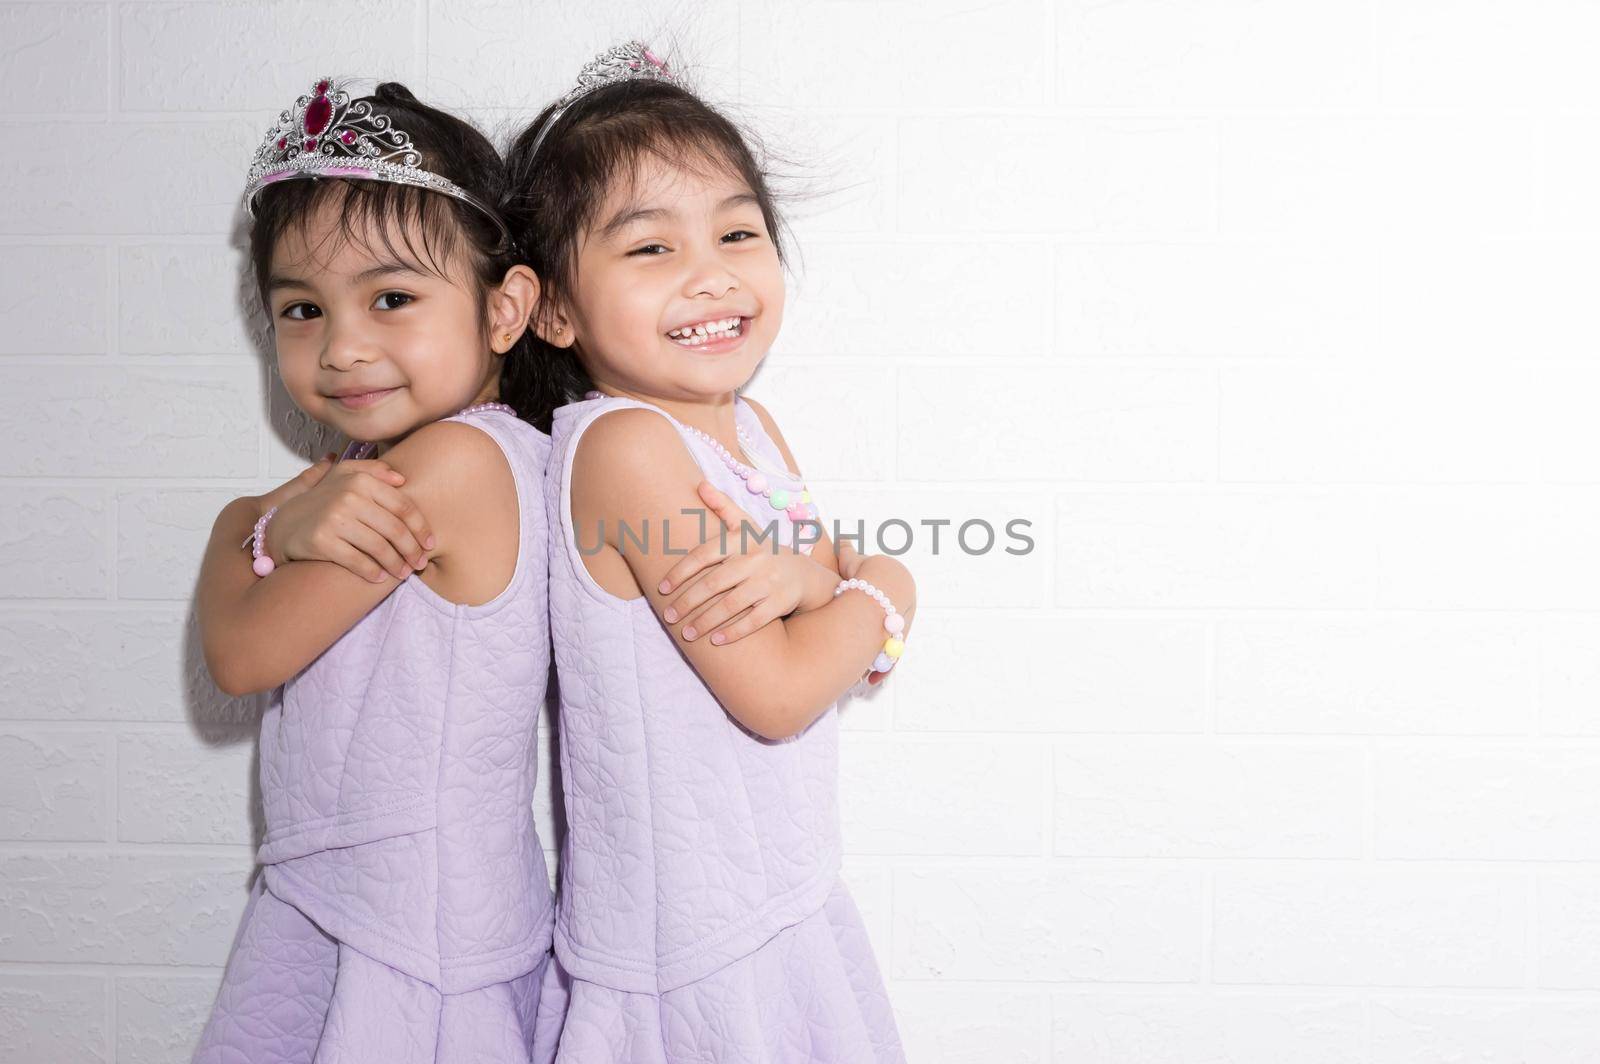 Female asian identical twins sitting on chair with white background. Wearing purple dress and accessories. Standing back to back with each other and having fun